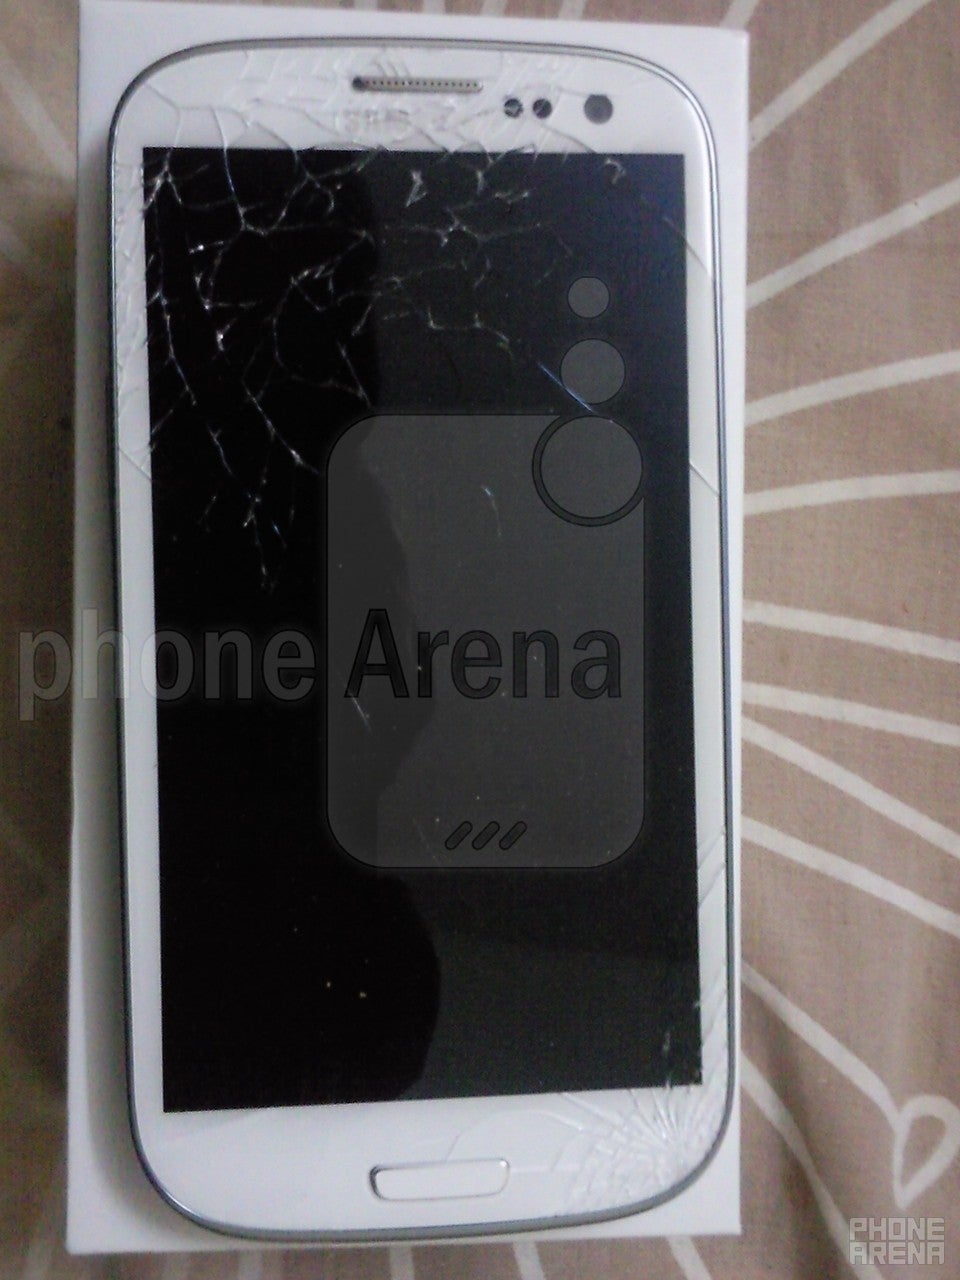 Samsung Galaxy S III meets gravity, Gorilla Glass 2 display suffers the consequences